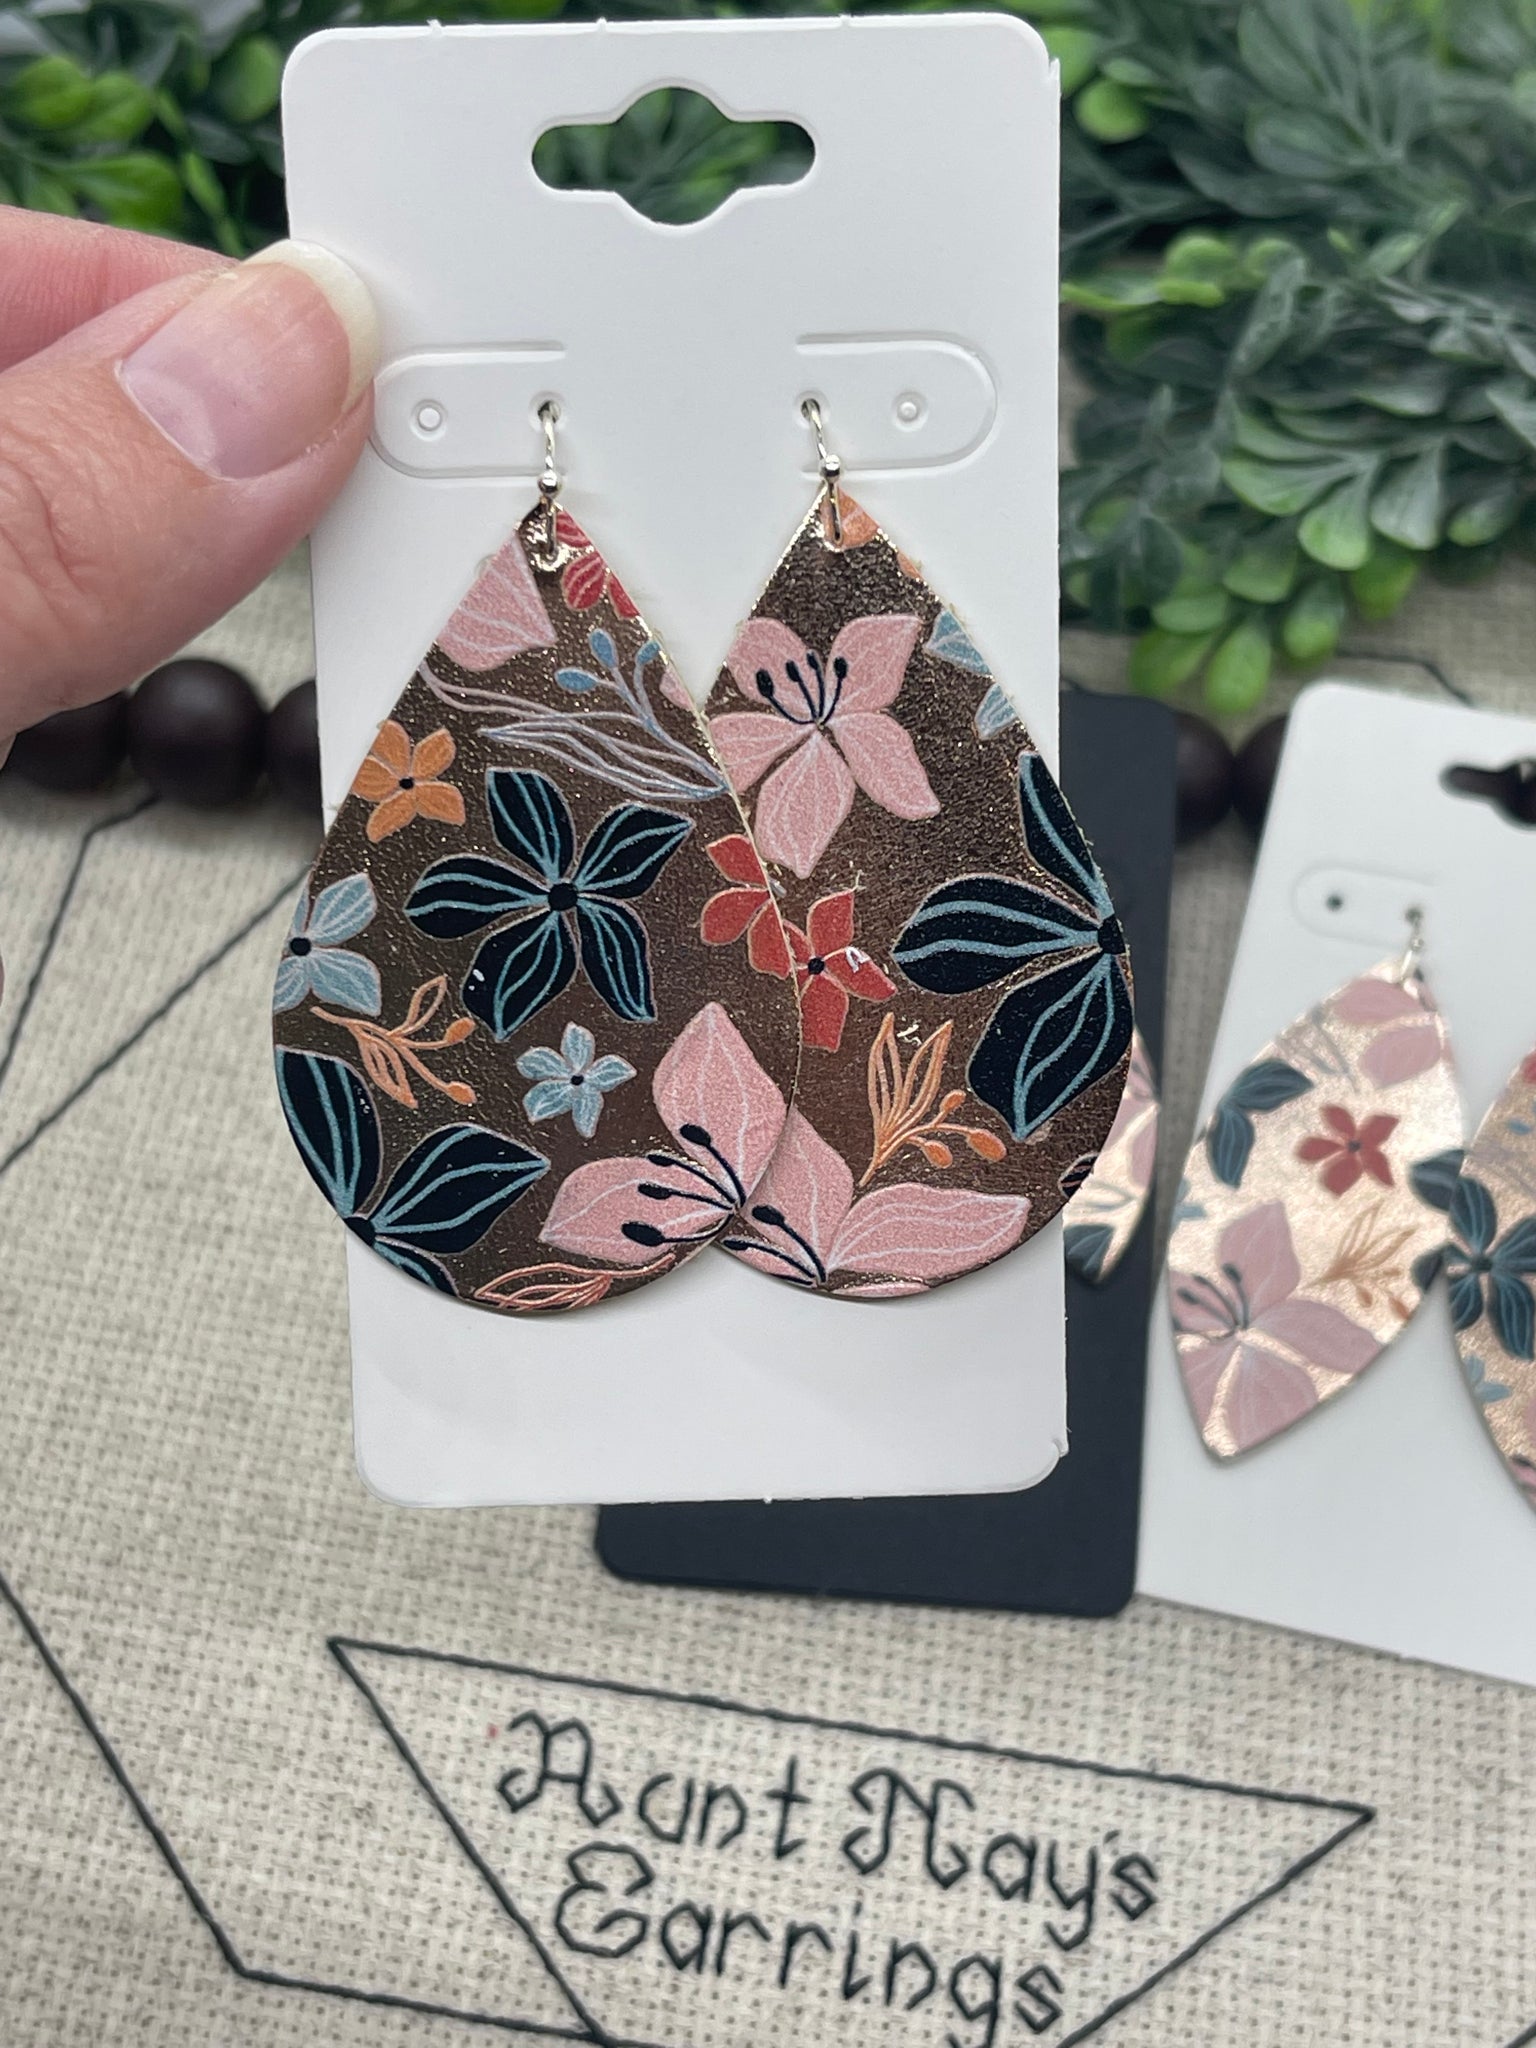 Rose Gold Metallic Leather with a Big Navy and Pink Floral Print Earrings